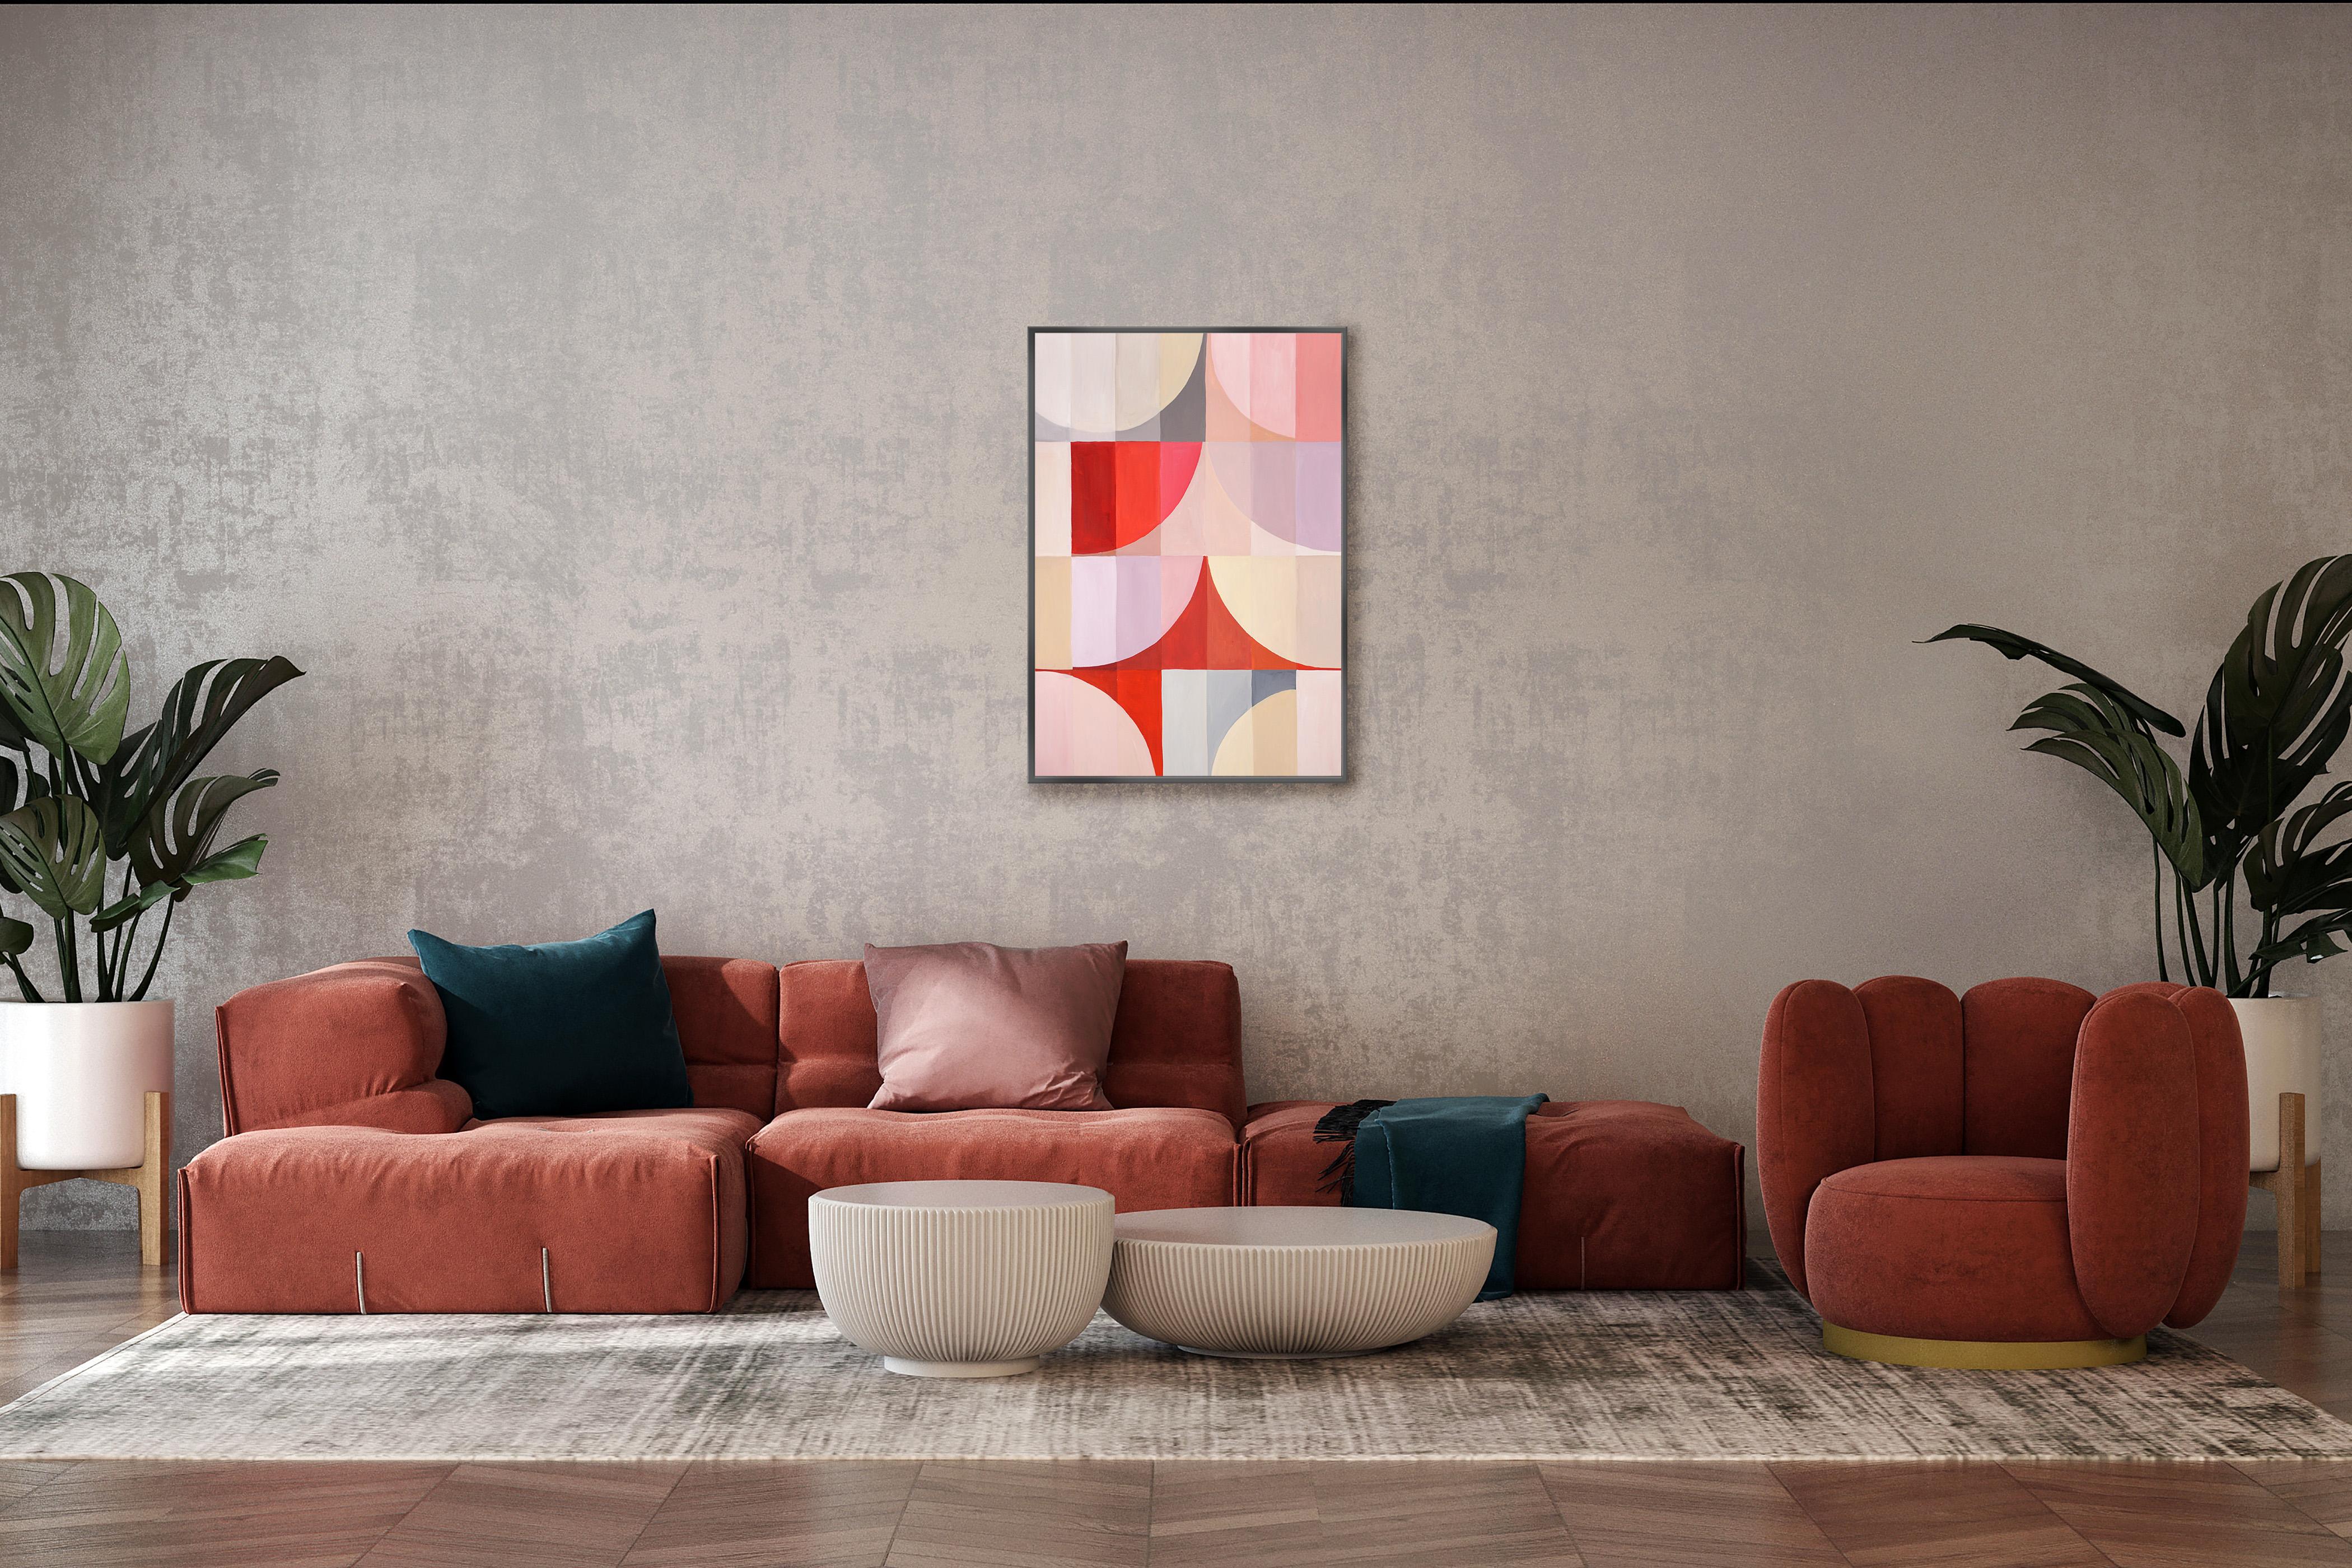 This abstract geometric acrylic painting is a vibrant and playful composition that draws inspiration from vintage Italian parasols. With a focus on bold, bright colors and clean lines, the painting features intersecting shapes and patterns that